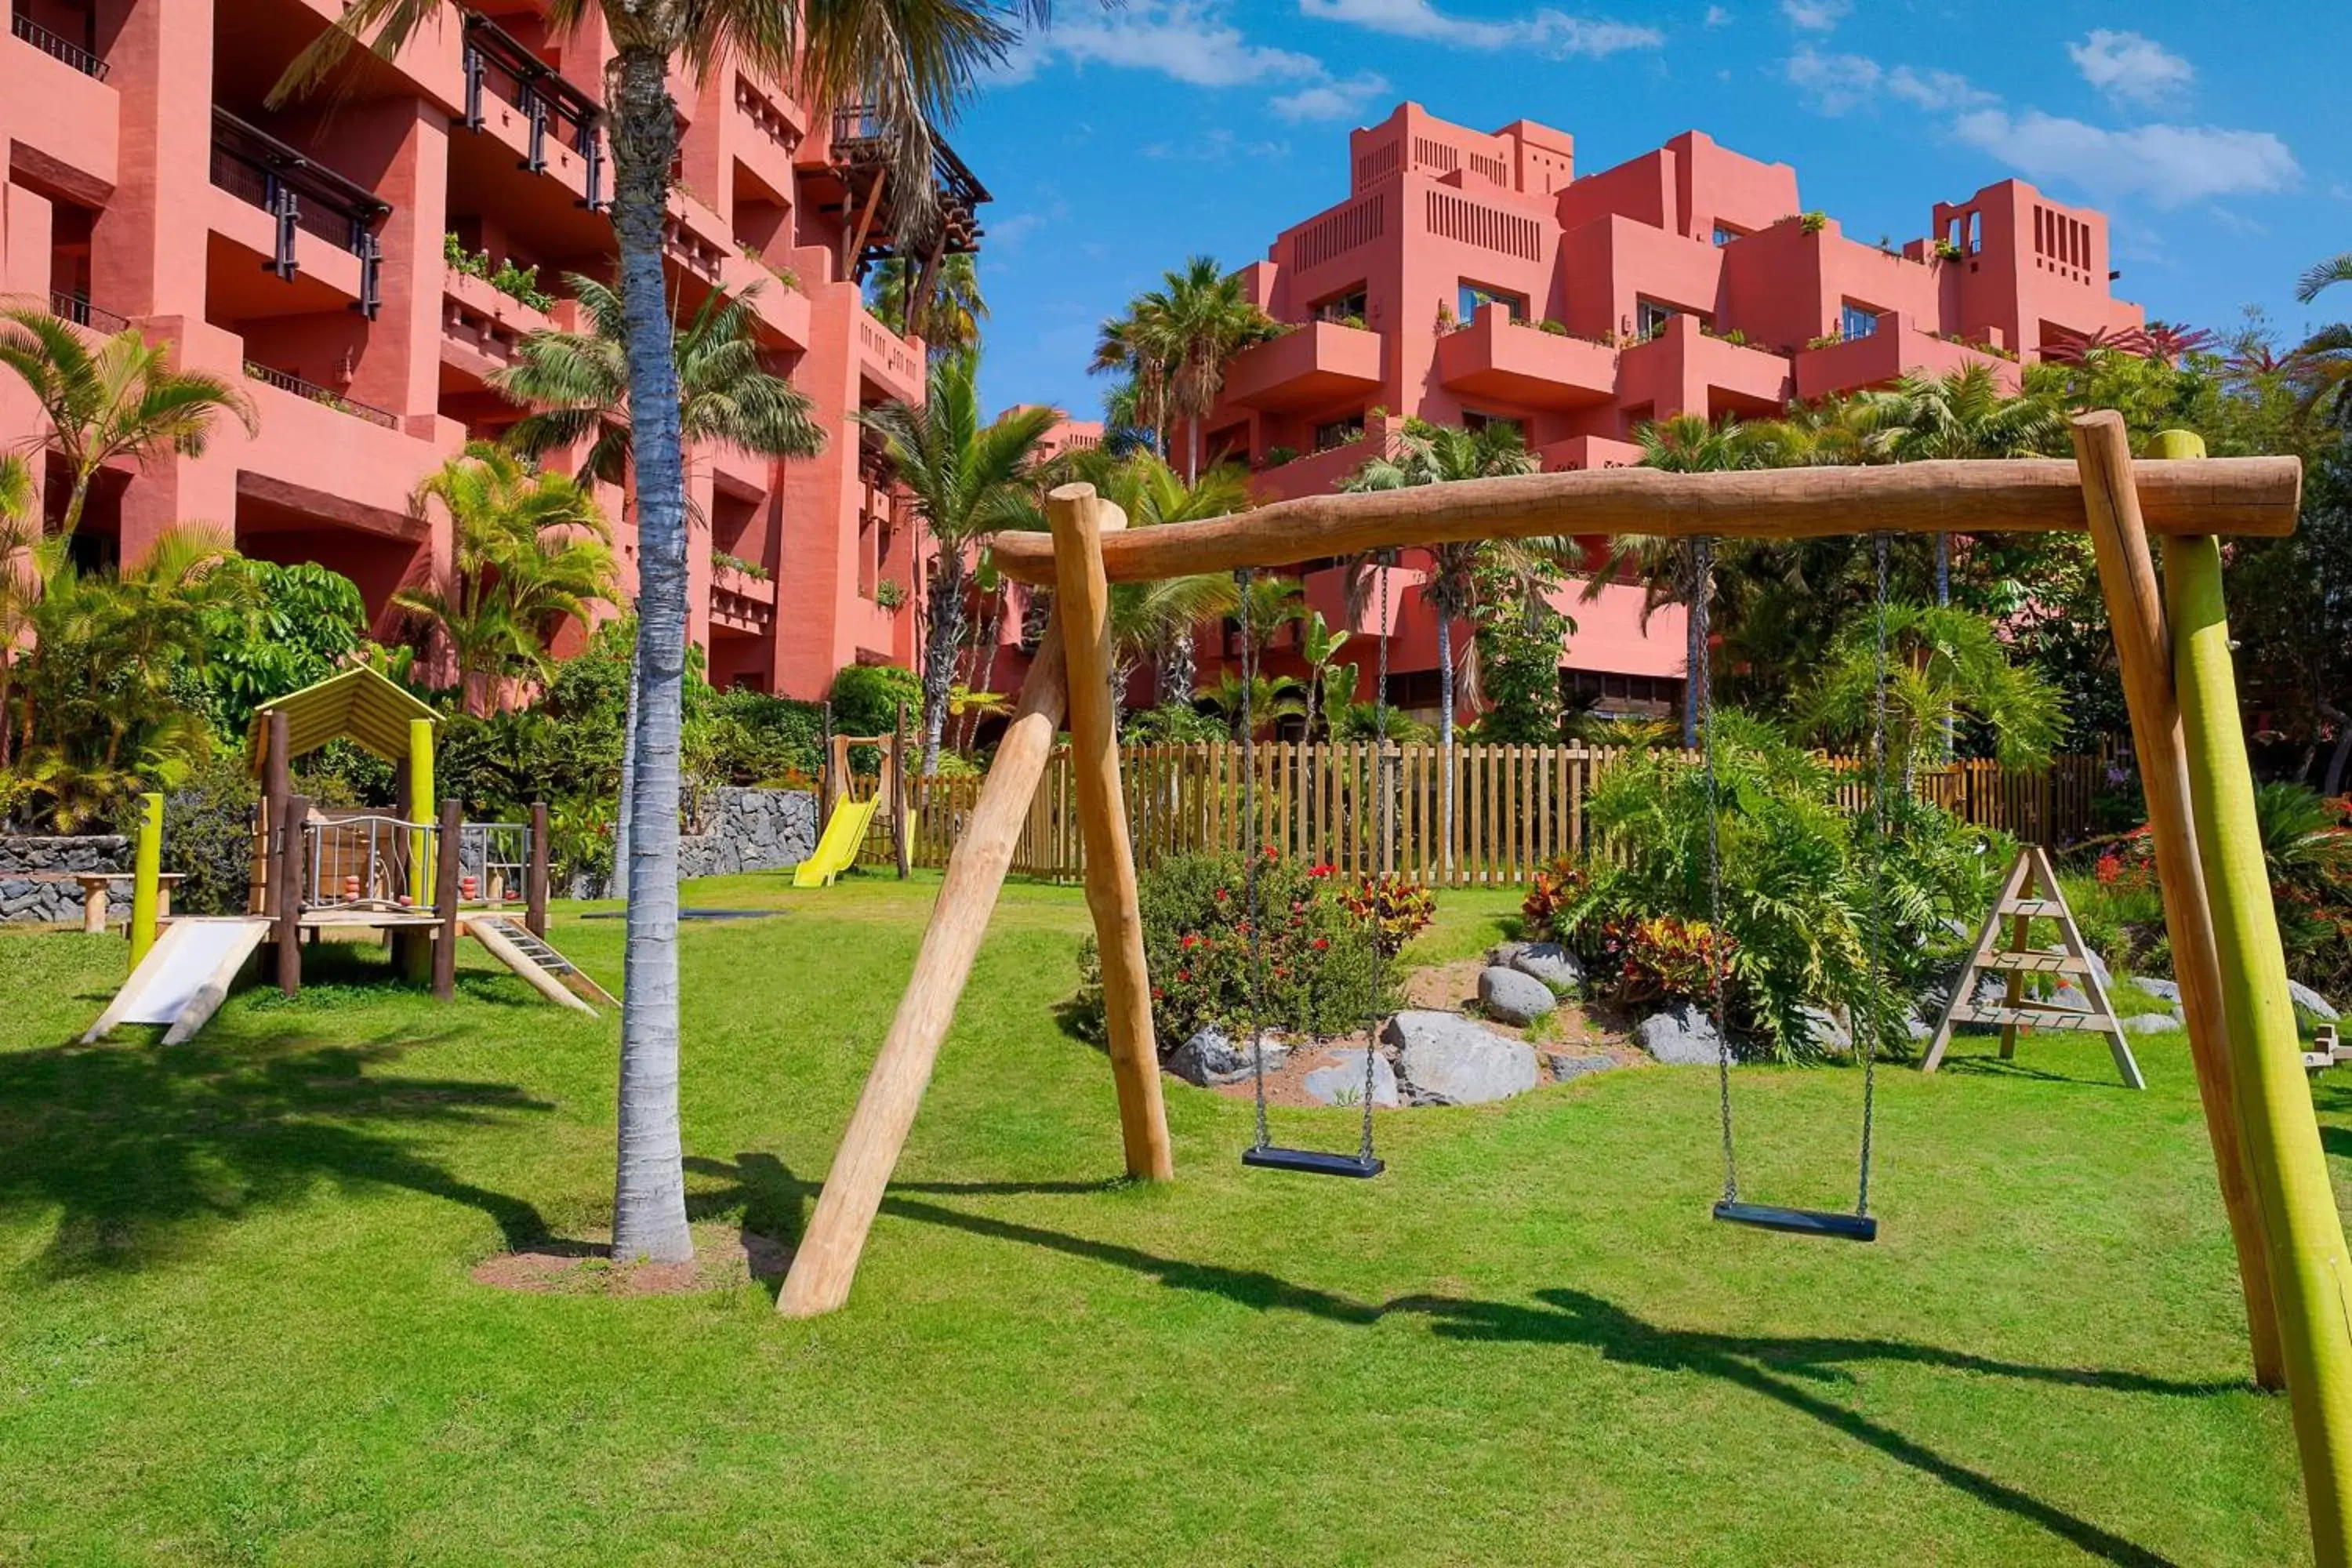 Other, Children's Play Area in The Ritz-Carlton Tenerife, Abama